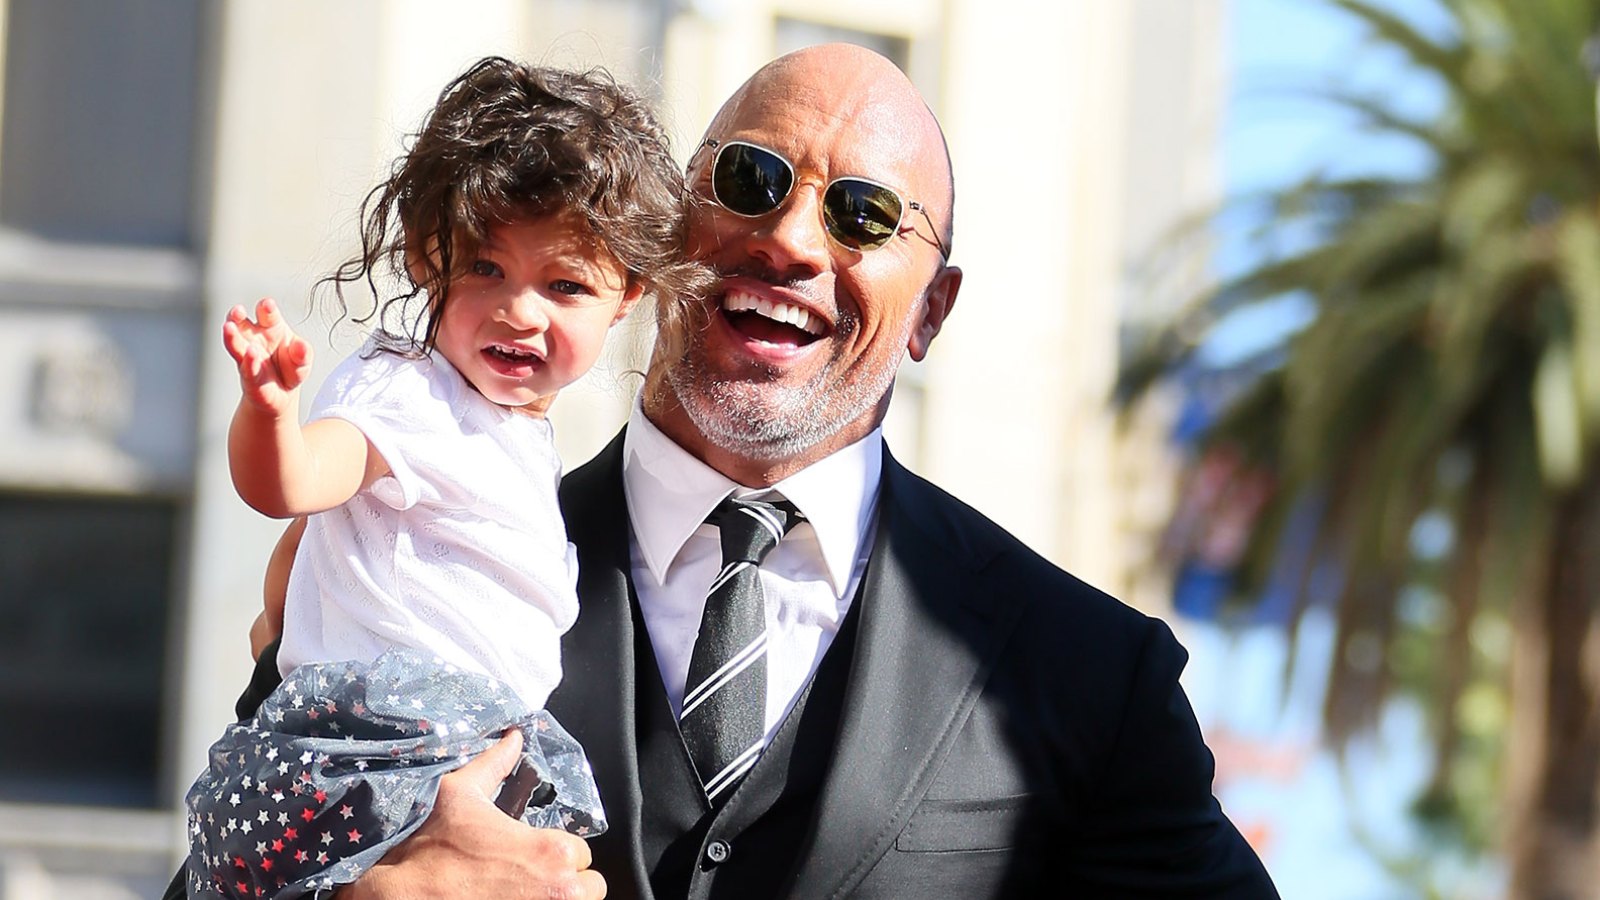 The Rock Says Christmas Morning With His Daughter Is 'Like Heaven'